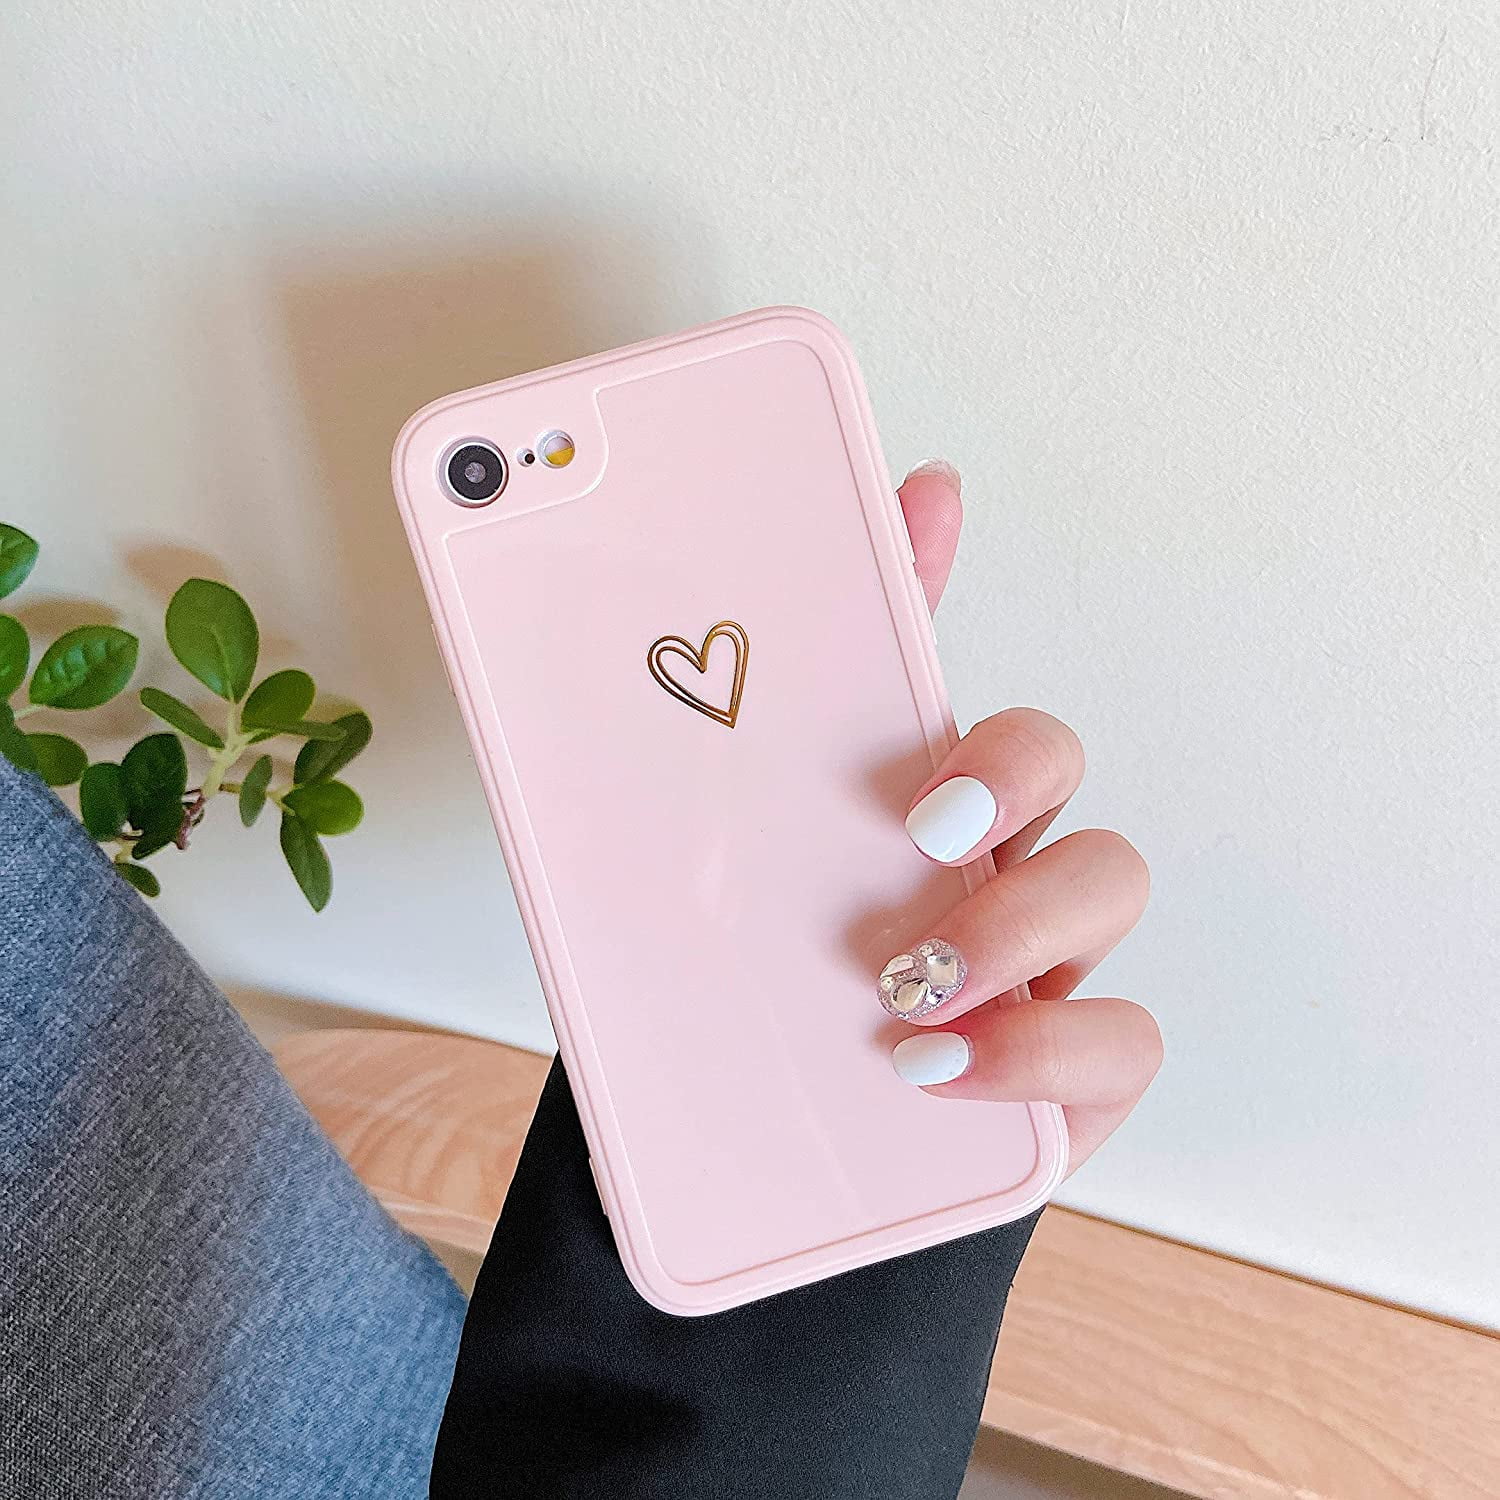 Case for iPhone iPhone 8 iPhone SE 2020, Cute Girls Love Heart Pattern Design Silicone Shockproof Protective Bumper Cover for iPhone 7/8/SE 2020 4.7", Beige-Hearts - Walmart.com